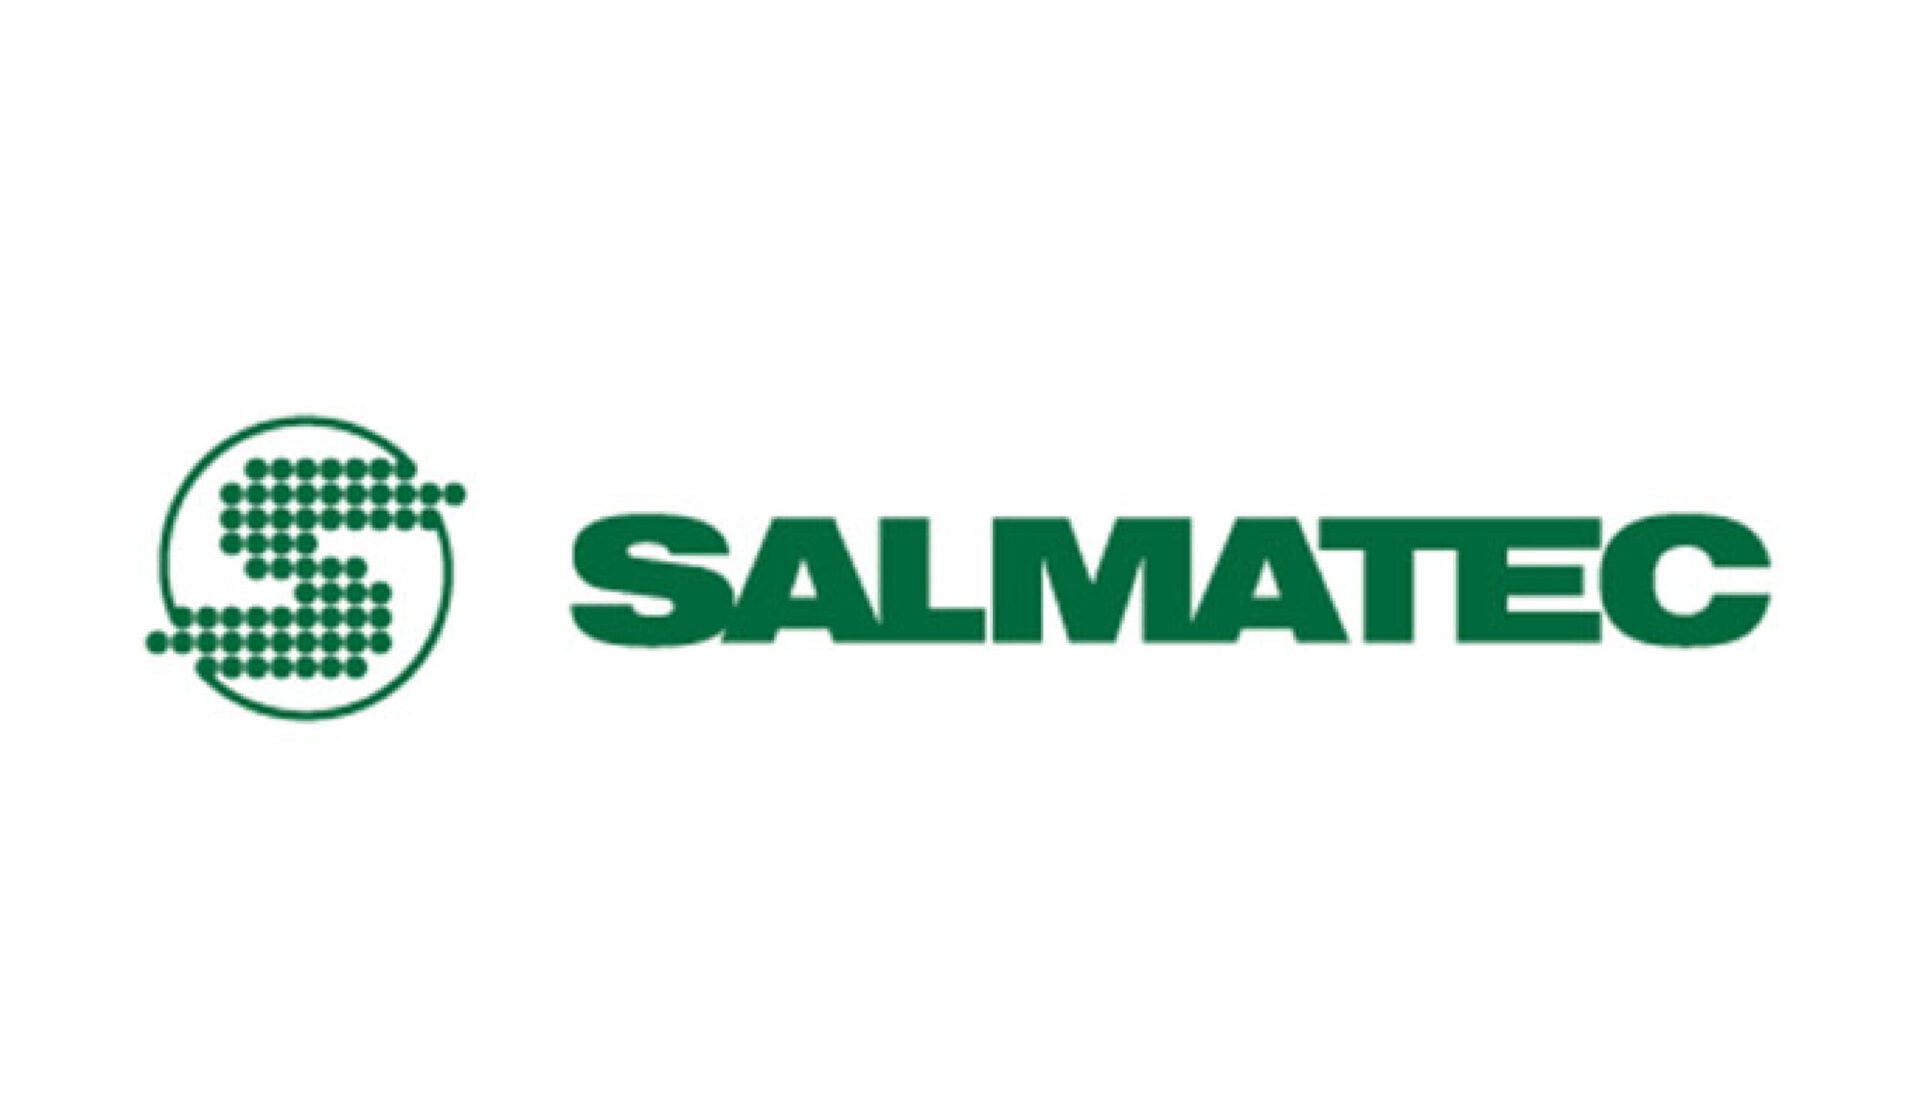 Salmatec logo in green with stylized S design